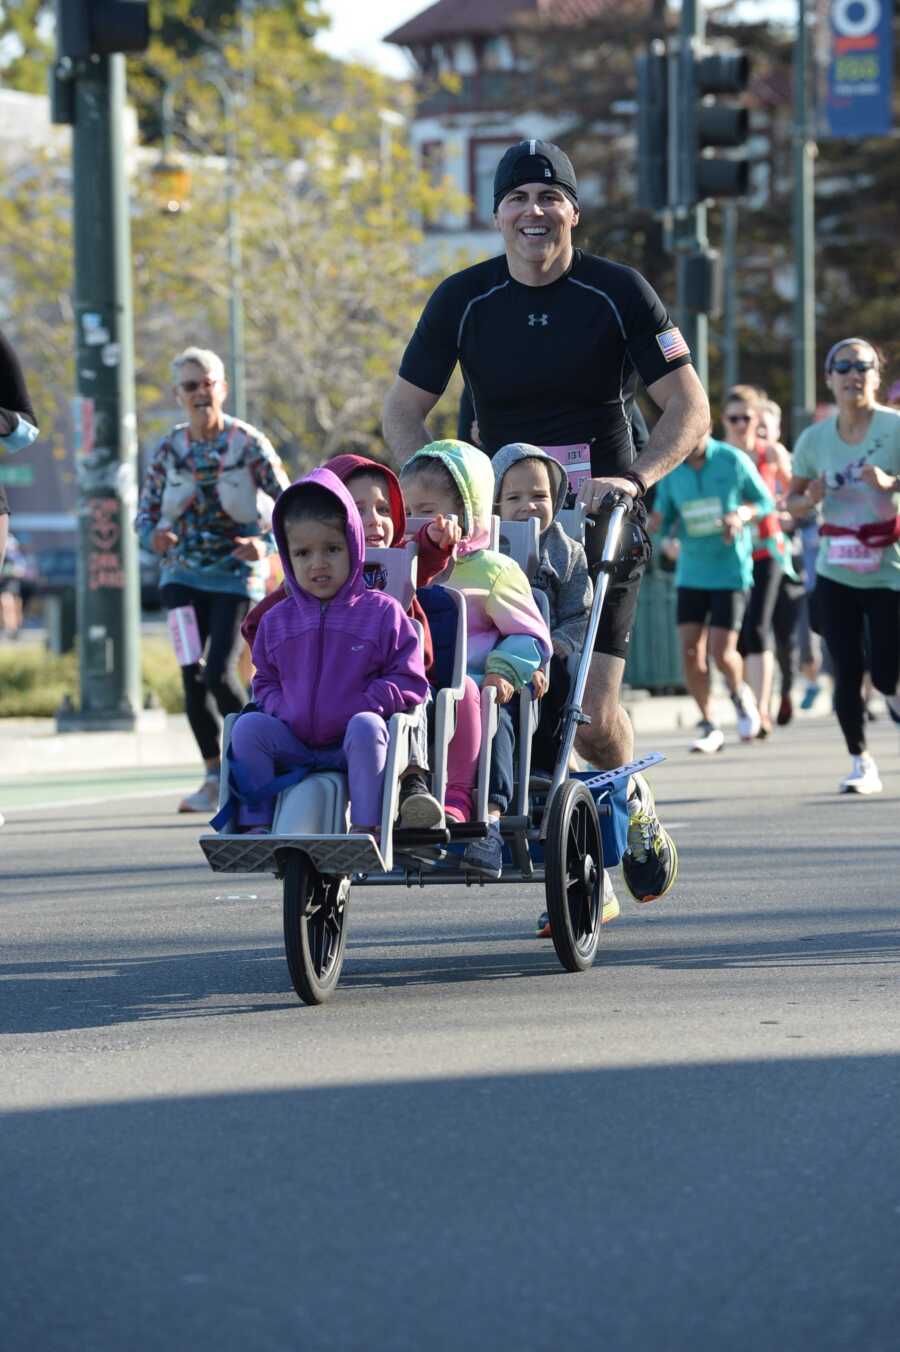 4-year-old quintuplets in stroller while father runs half marathon